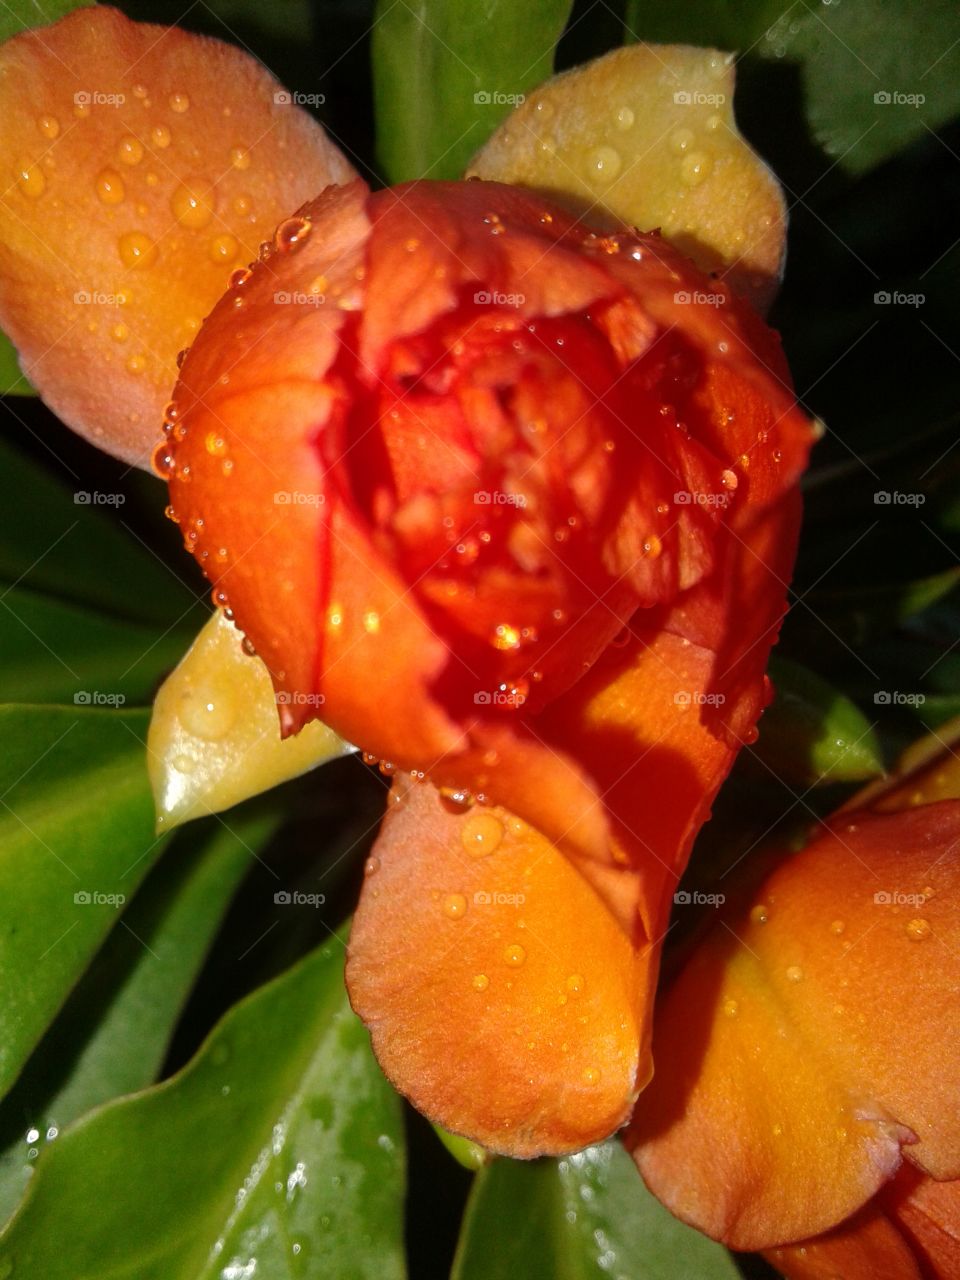 clos up flower with full of water drops after the rain